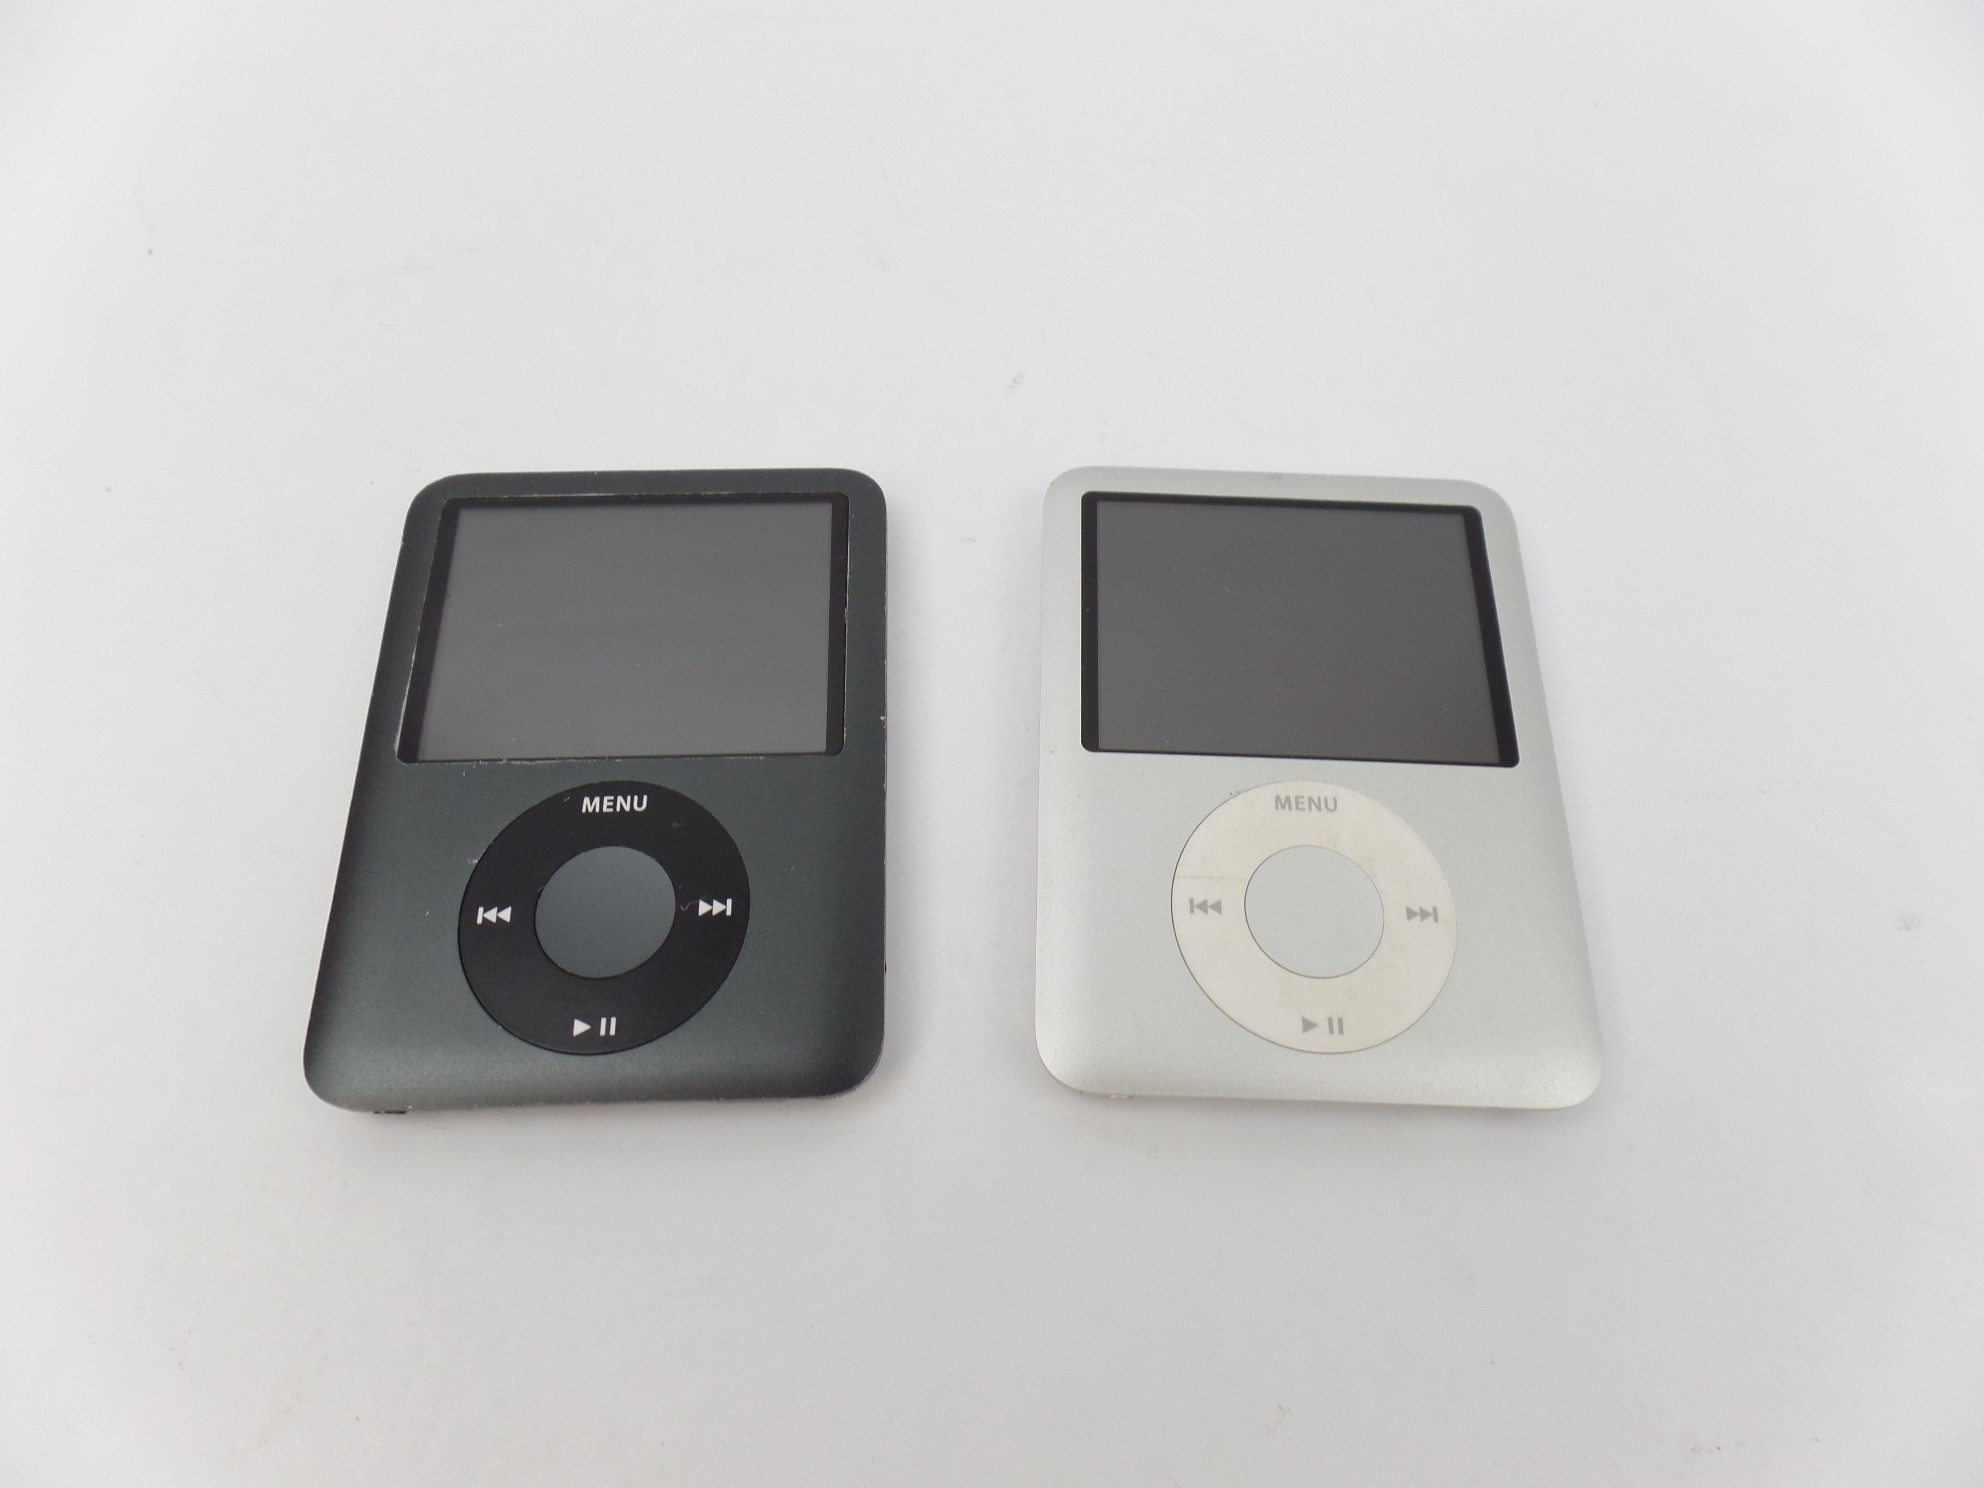 Read: For Parts Lot of 2 Apple iPod Nano 3rd Generation A1236 8GB